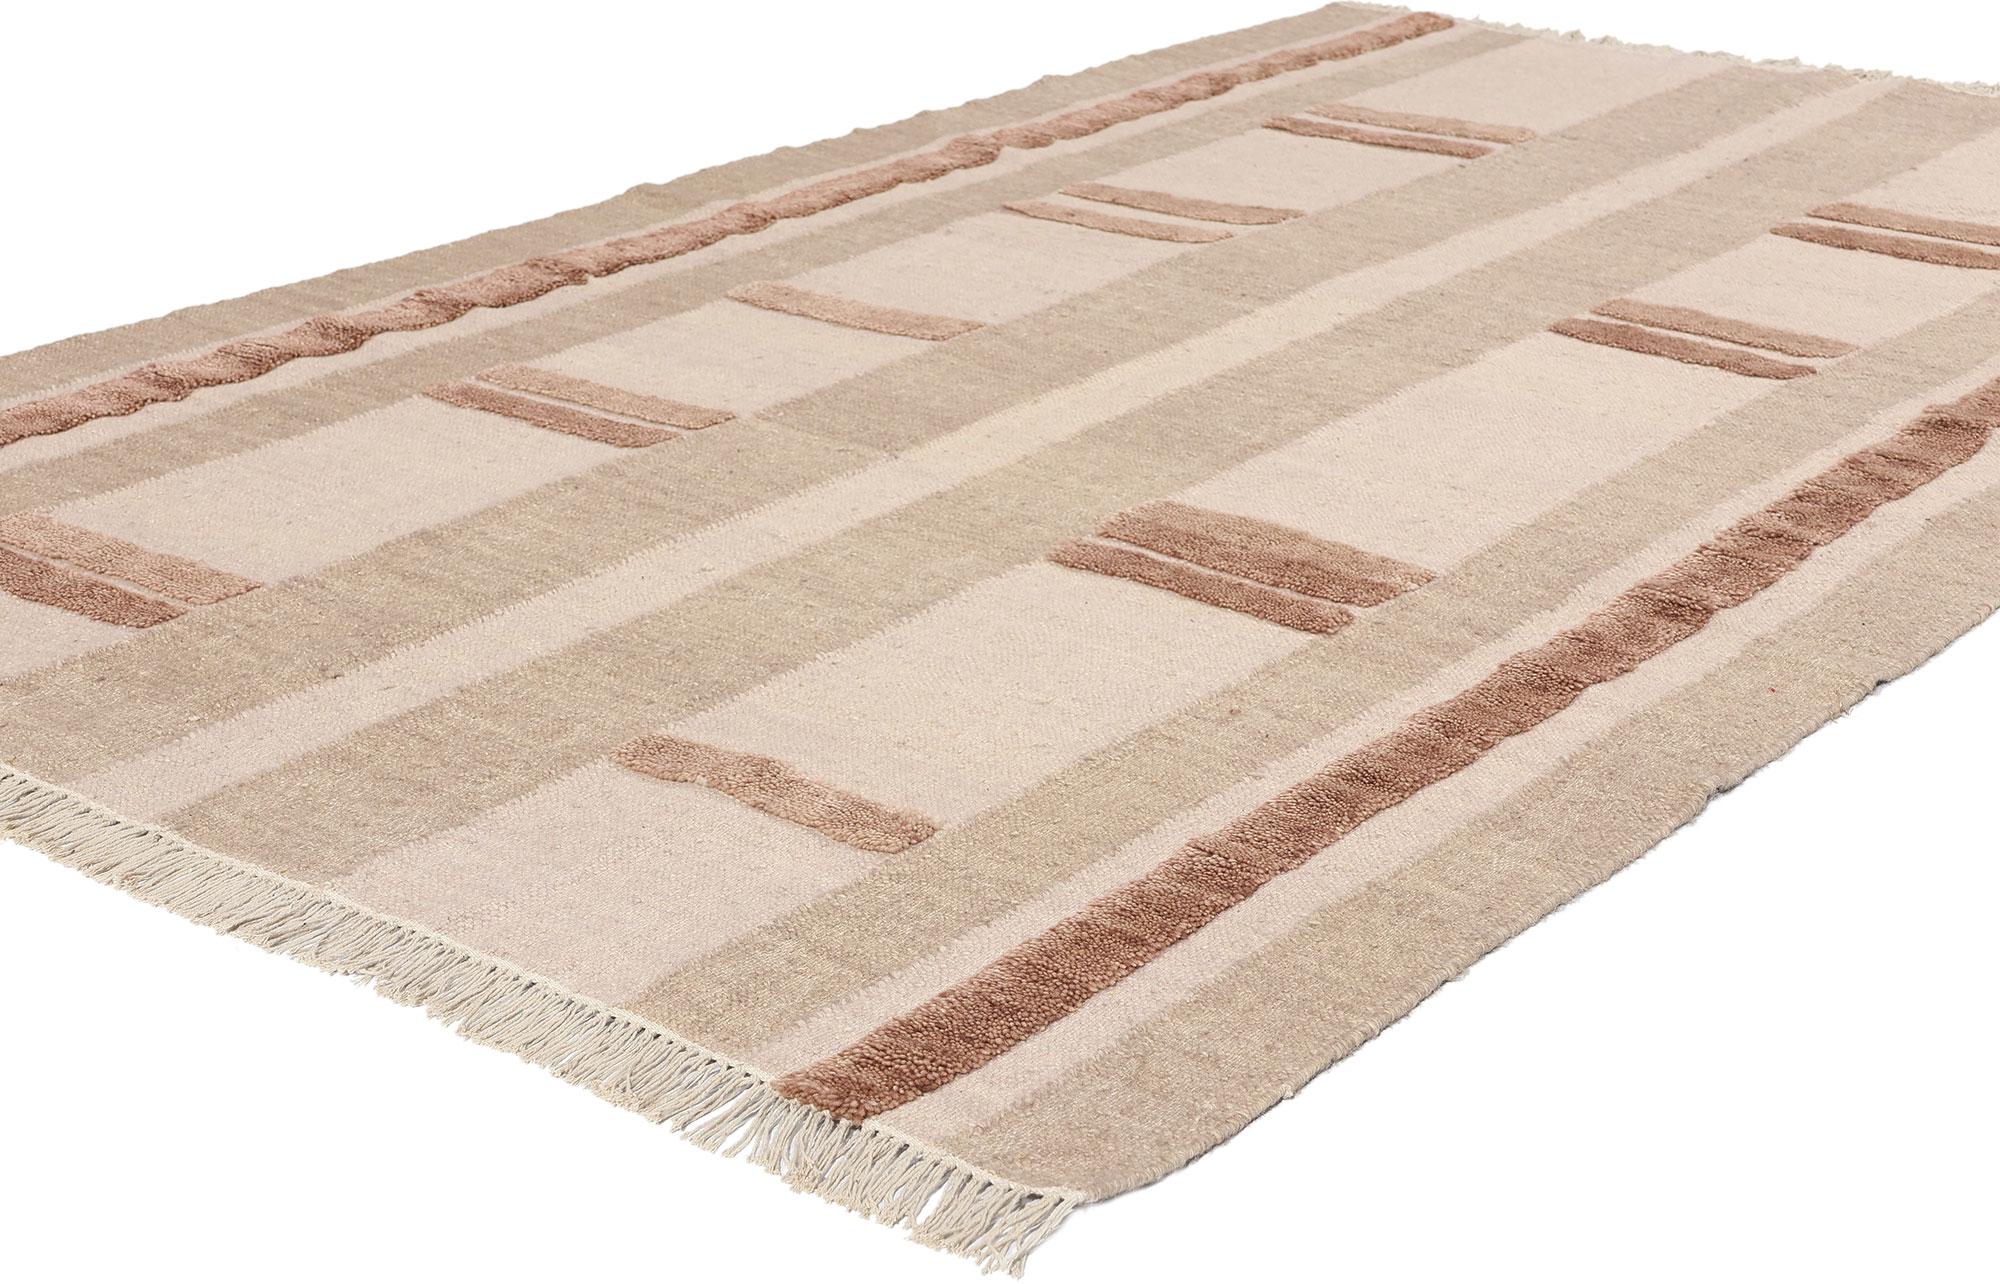 31004 Organic Modern High-Low Rug, 05'03 x 08'04. Contemporary Indian High-Low Kilim rugs are modern adaptations of traditional Kilim rugs, characterized by their flat-woven texture with varying pile heights, creating depth and visual interest.